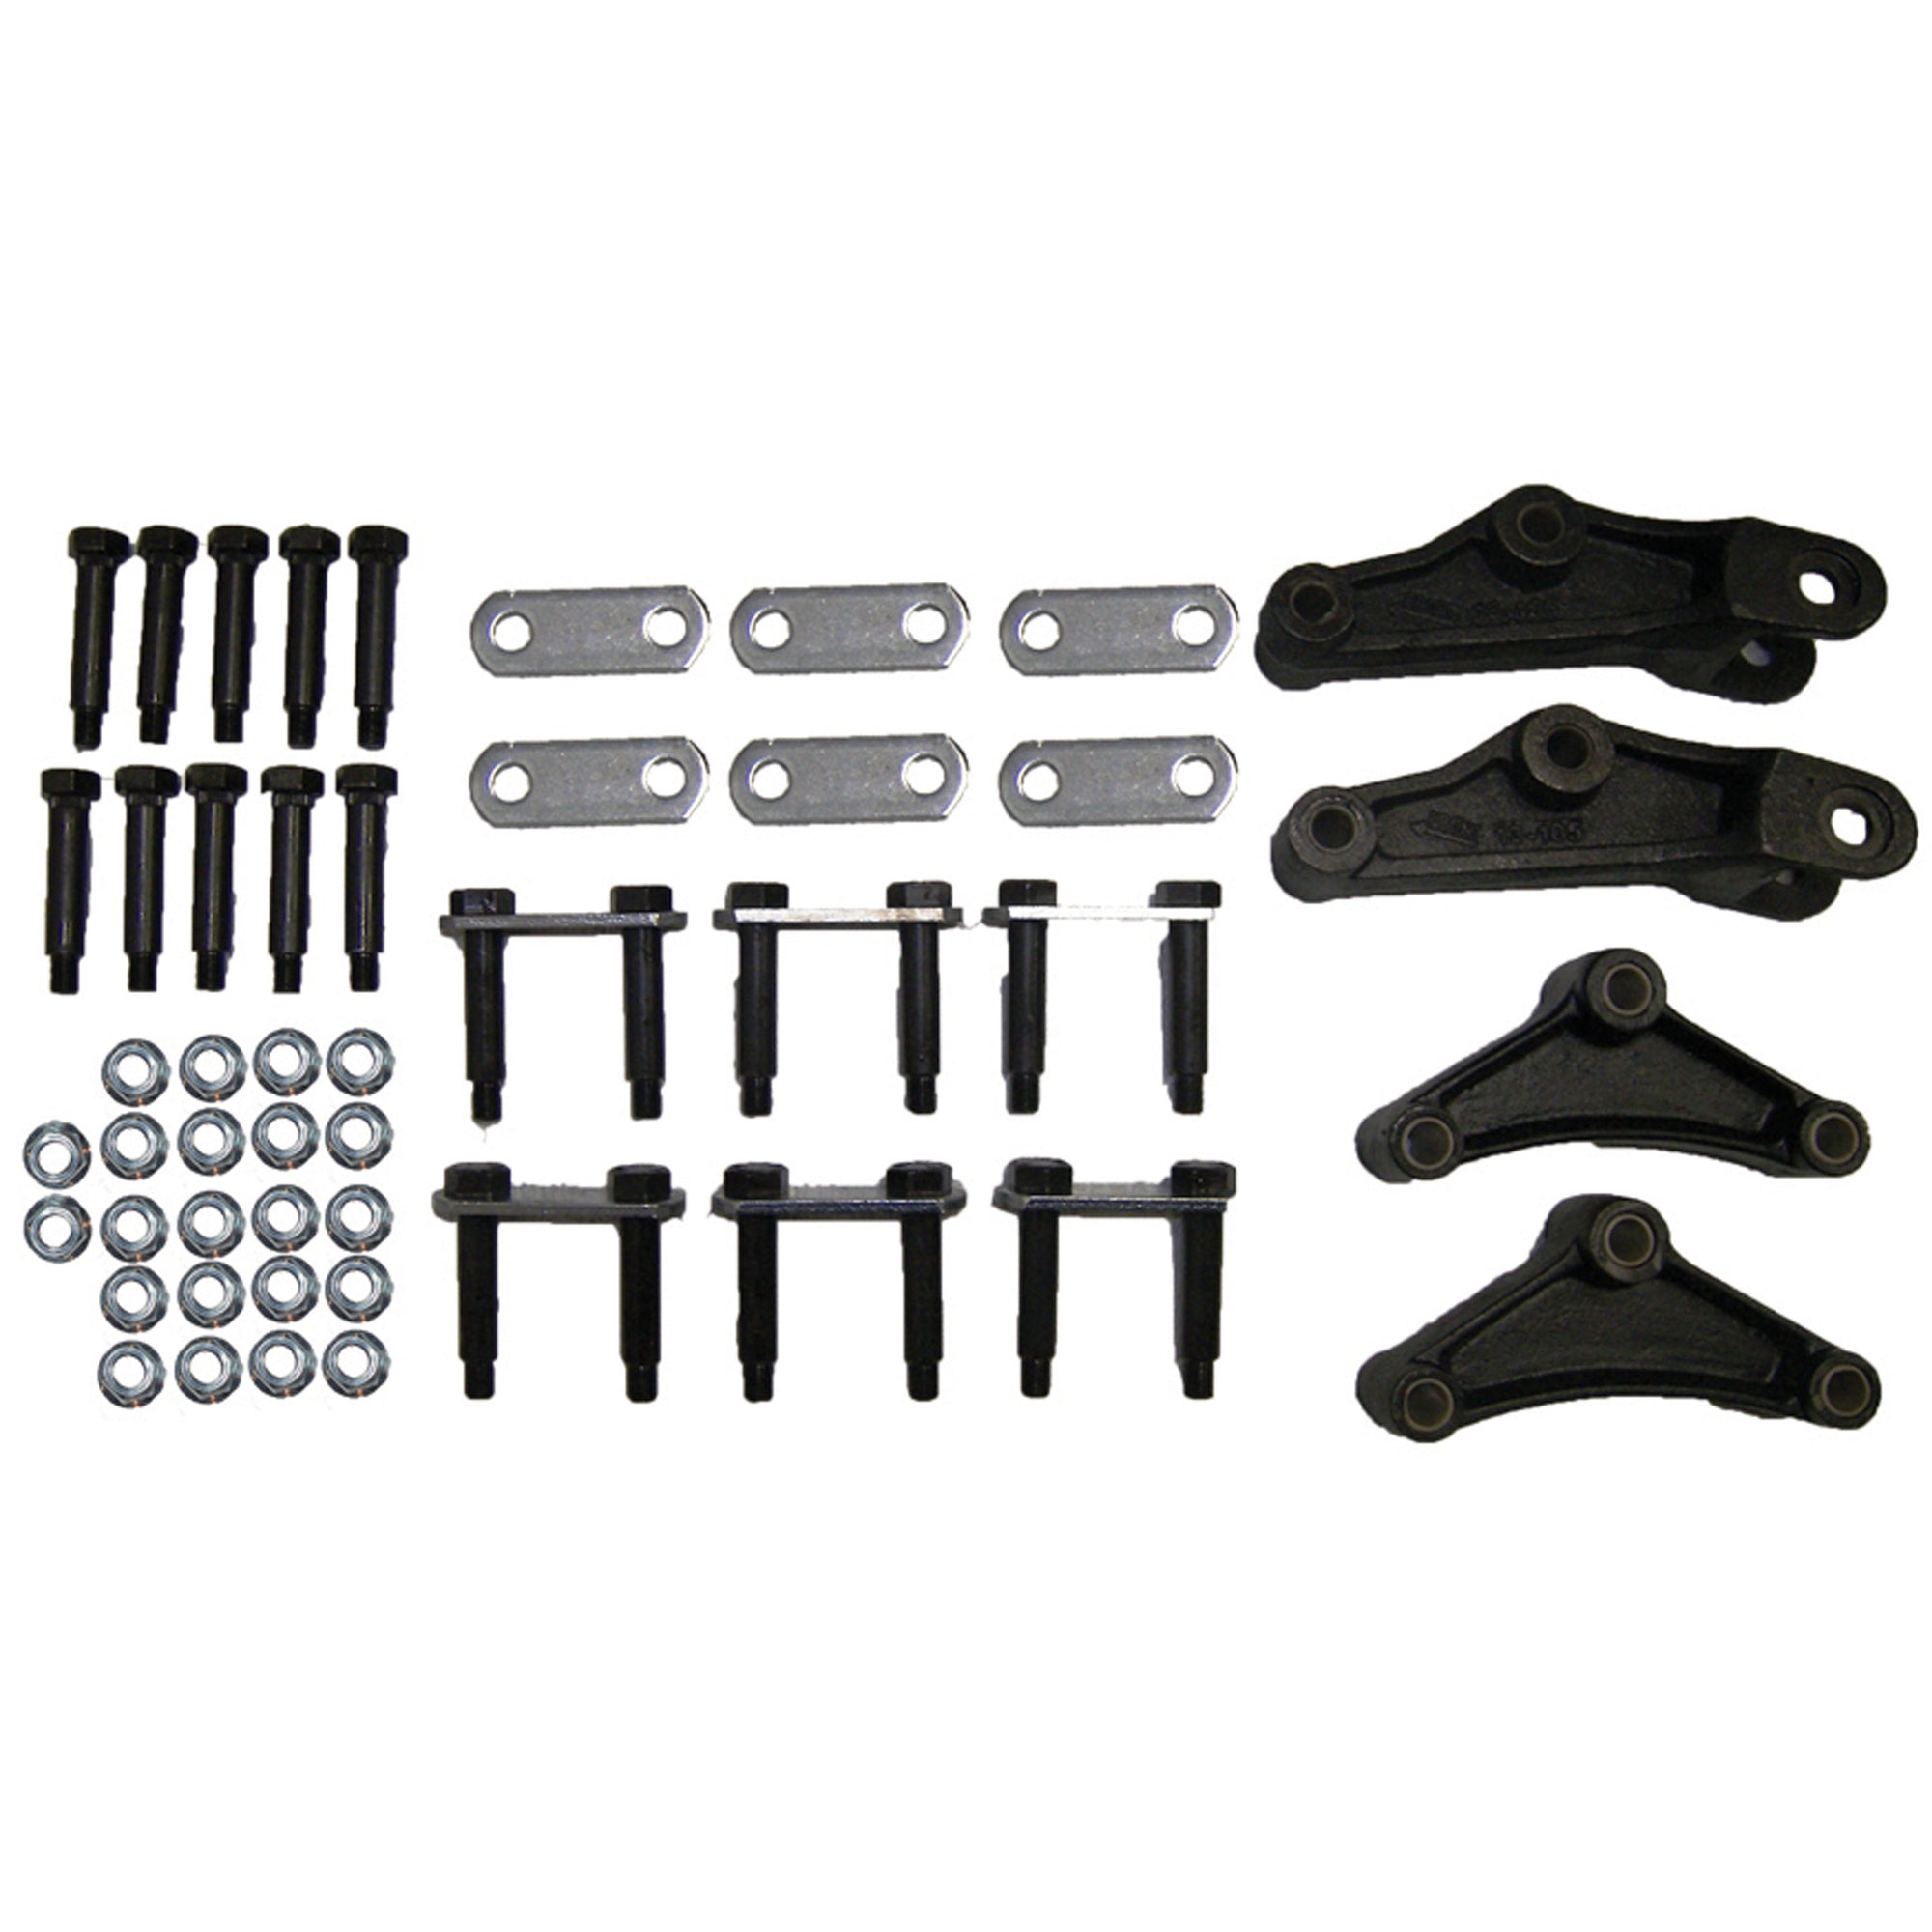 AP Products 014-121100 Tandem Axle Shackle Kit - Triple for 33" Axle Spacing EQ-104 & EQ-105